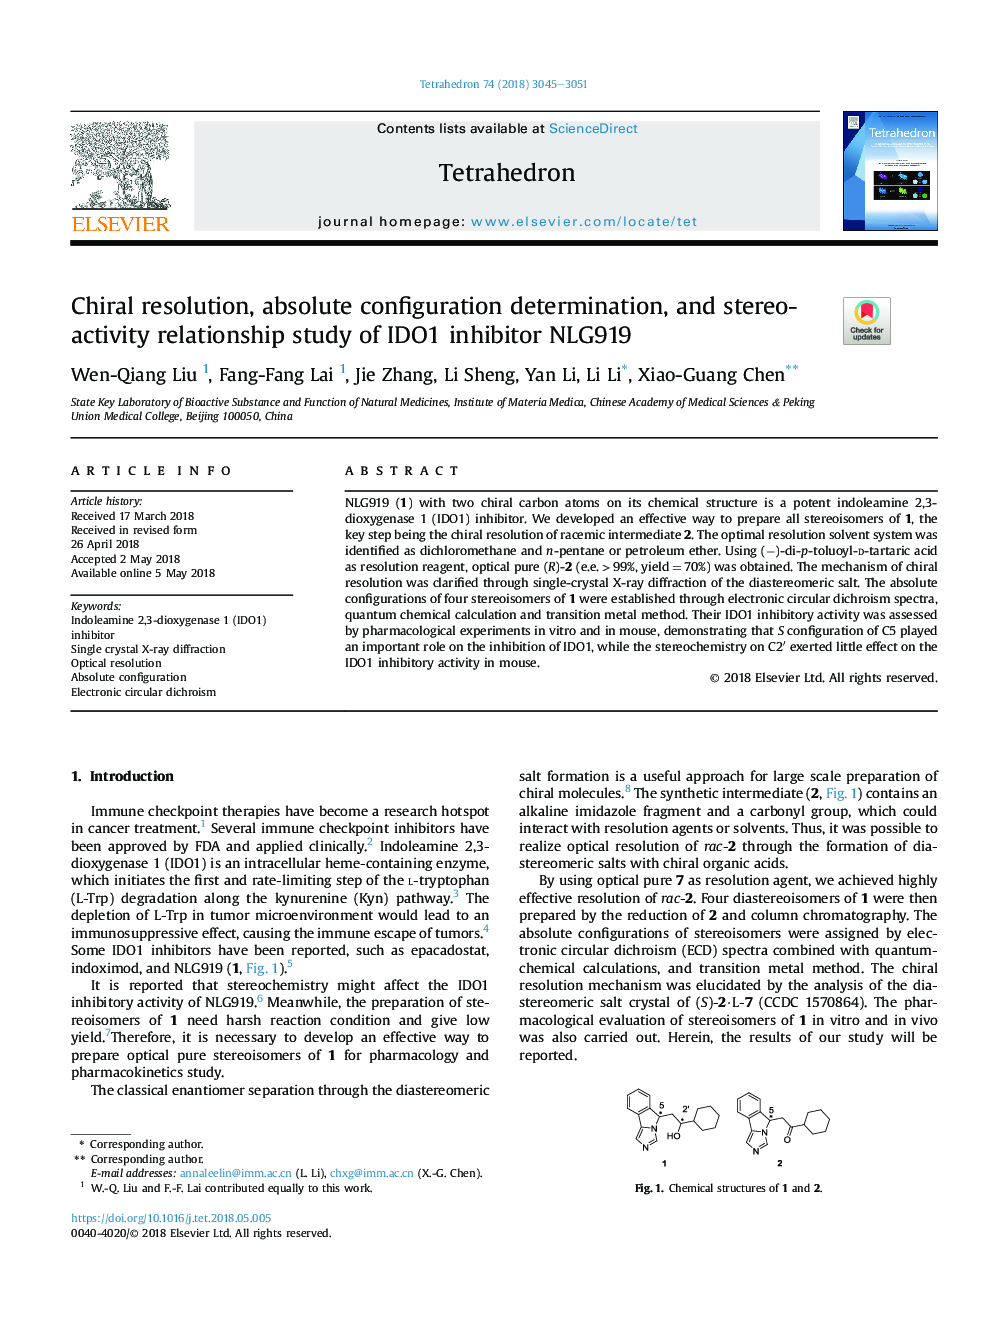 Chiral resolution, absolute configuration determination, and stereo-activity relationship study of IDO1 inhibitor NLG919